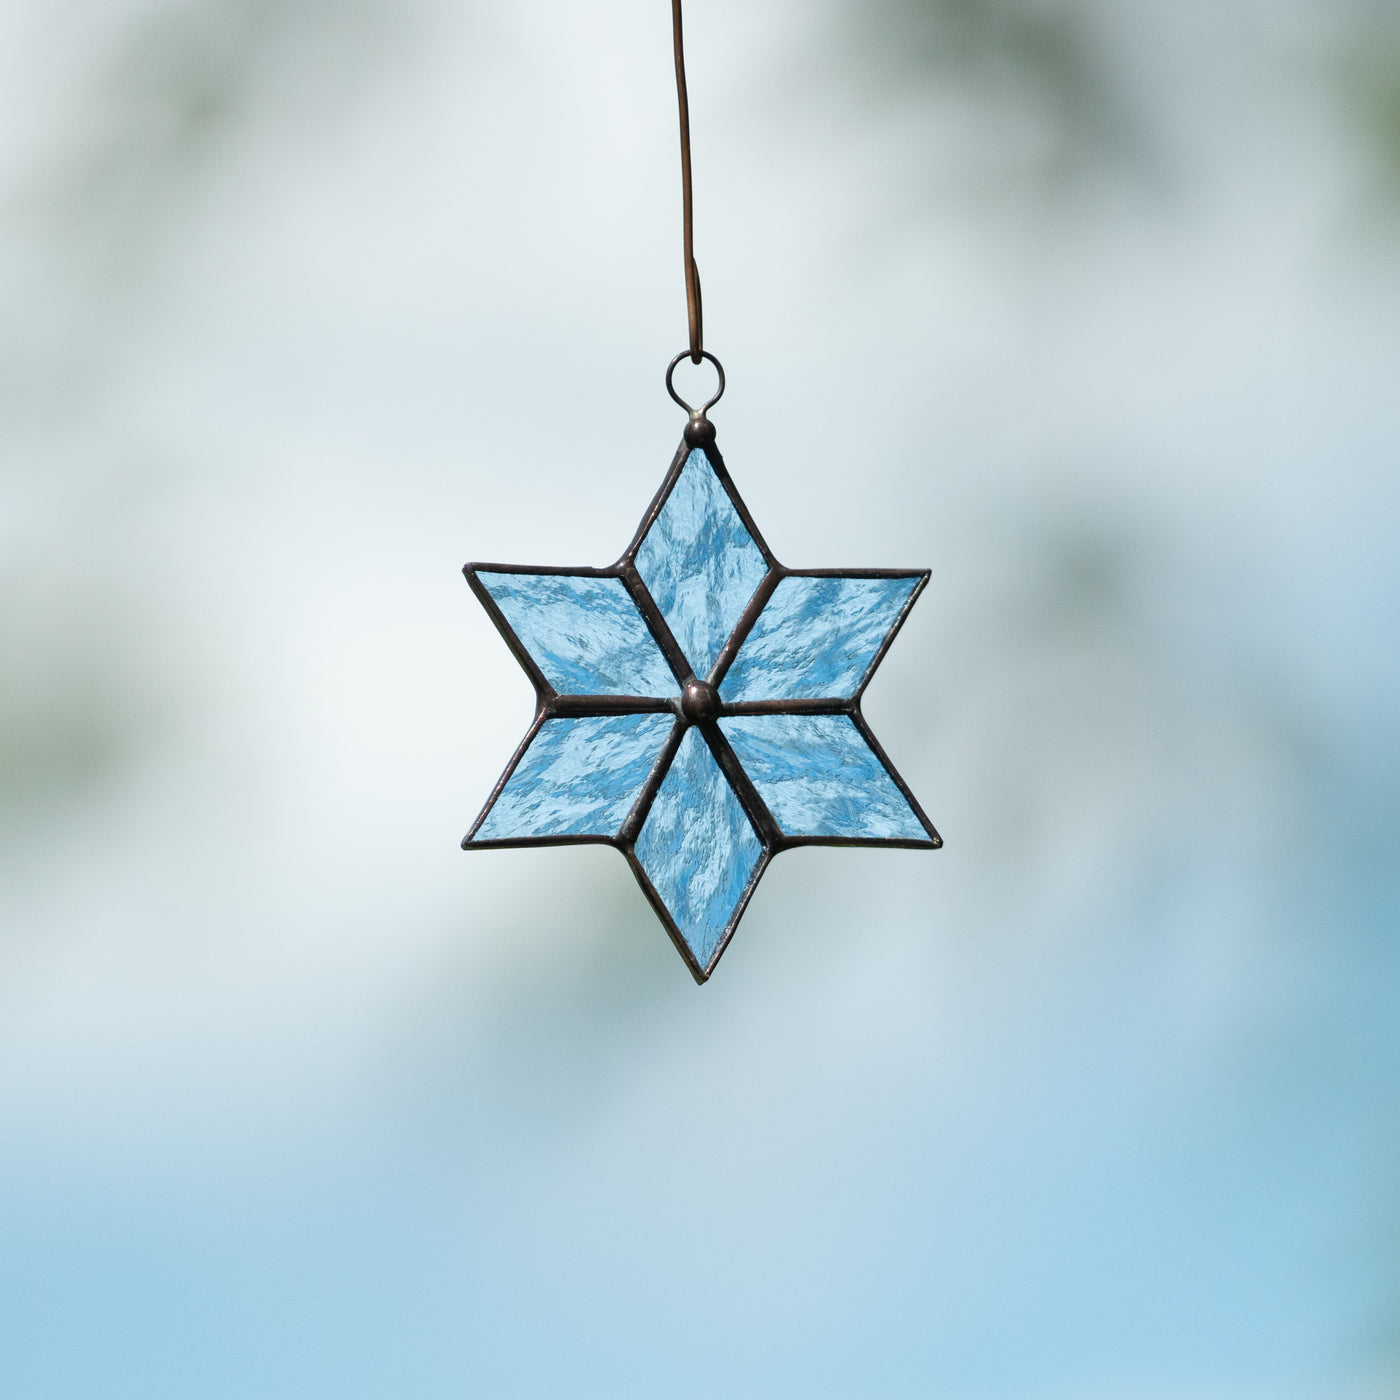 Stained glass snowflake suncatcher for winter holidays decor